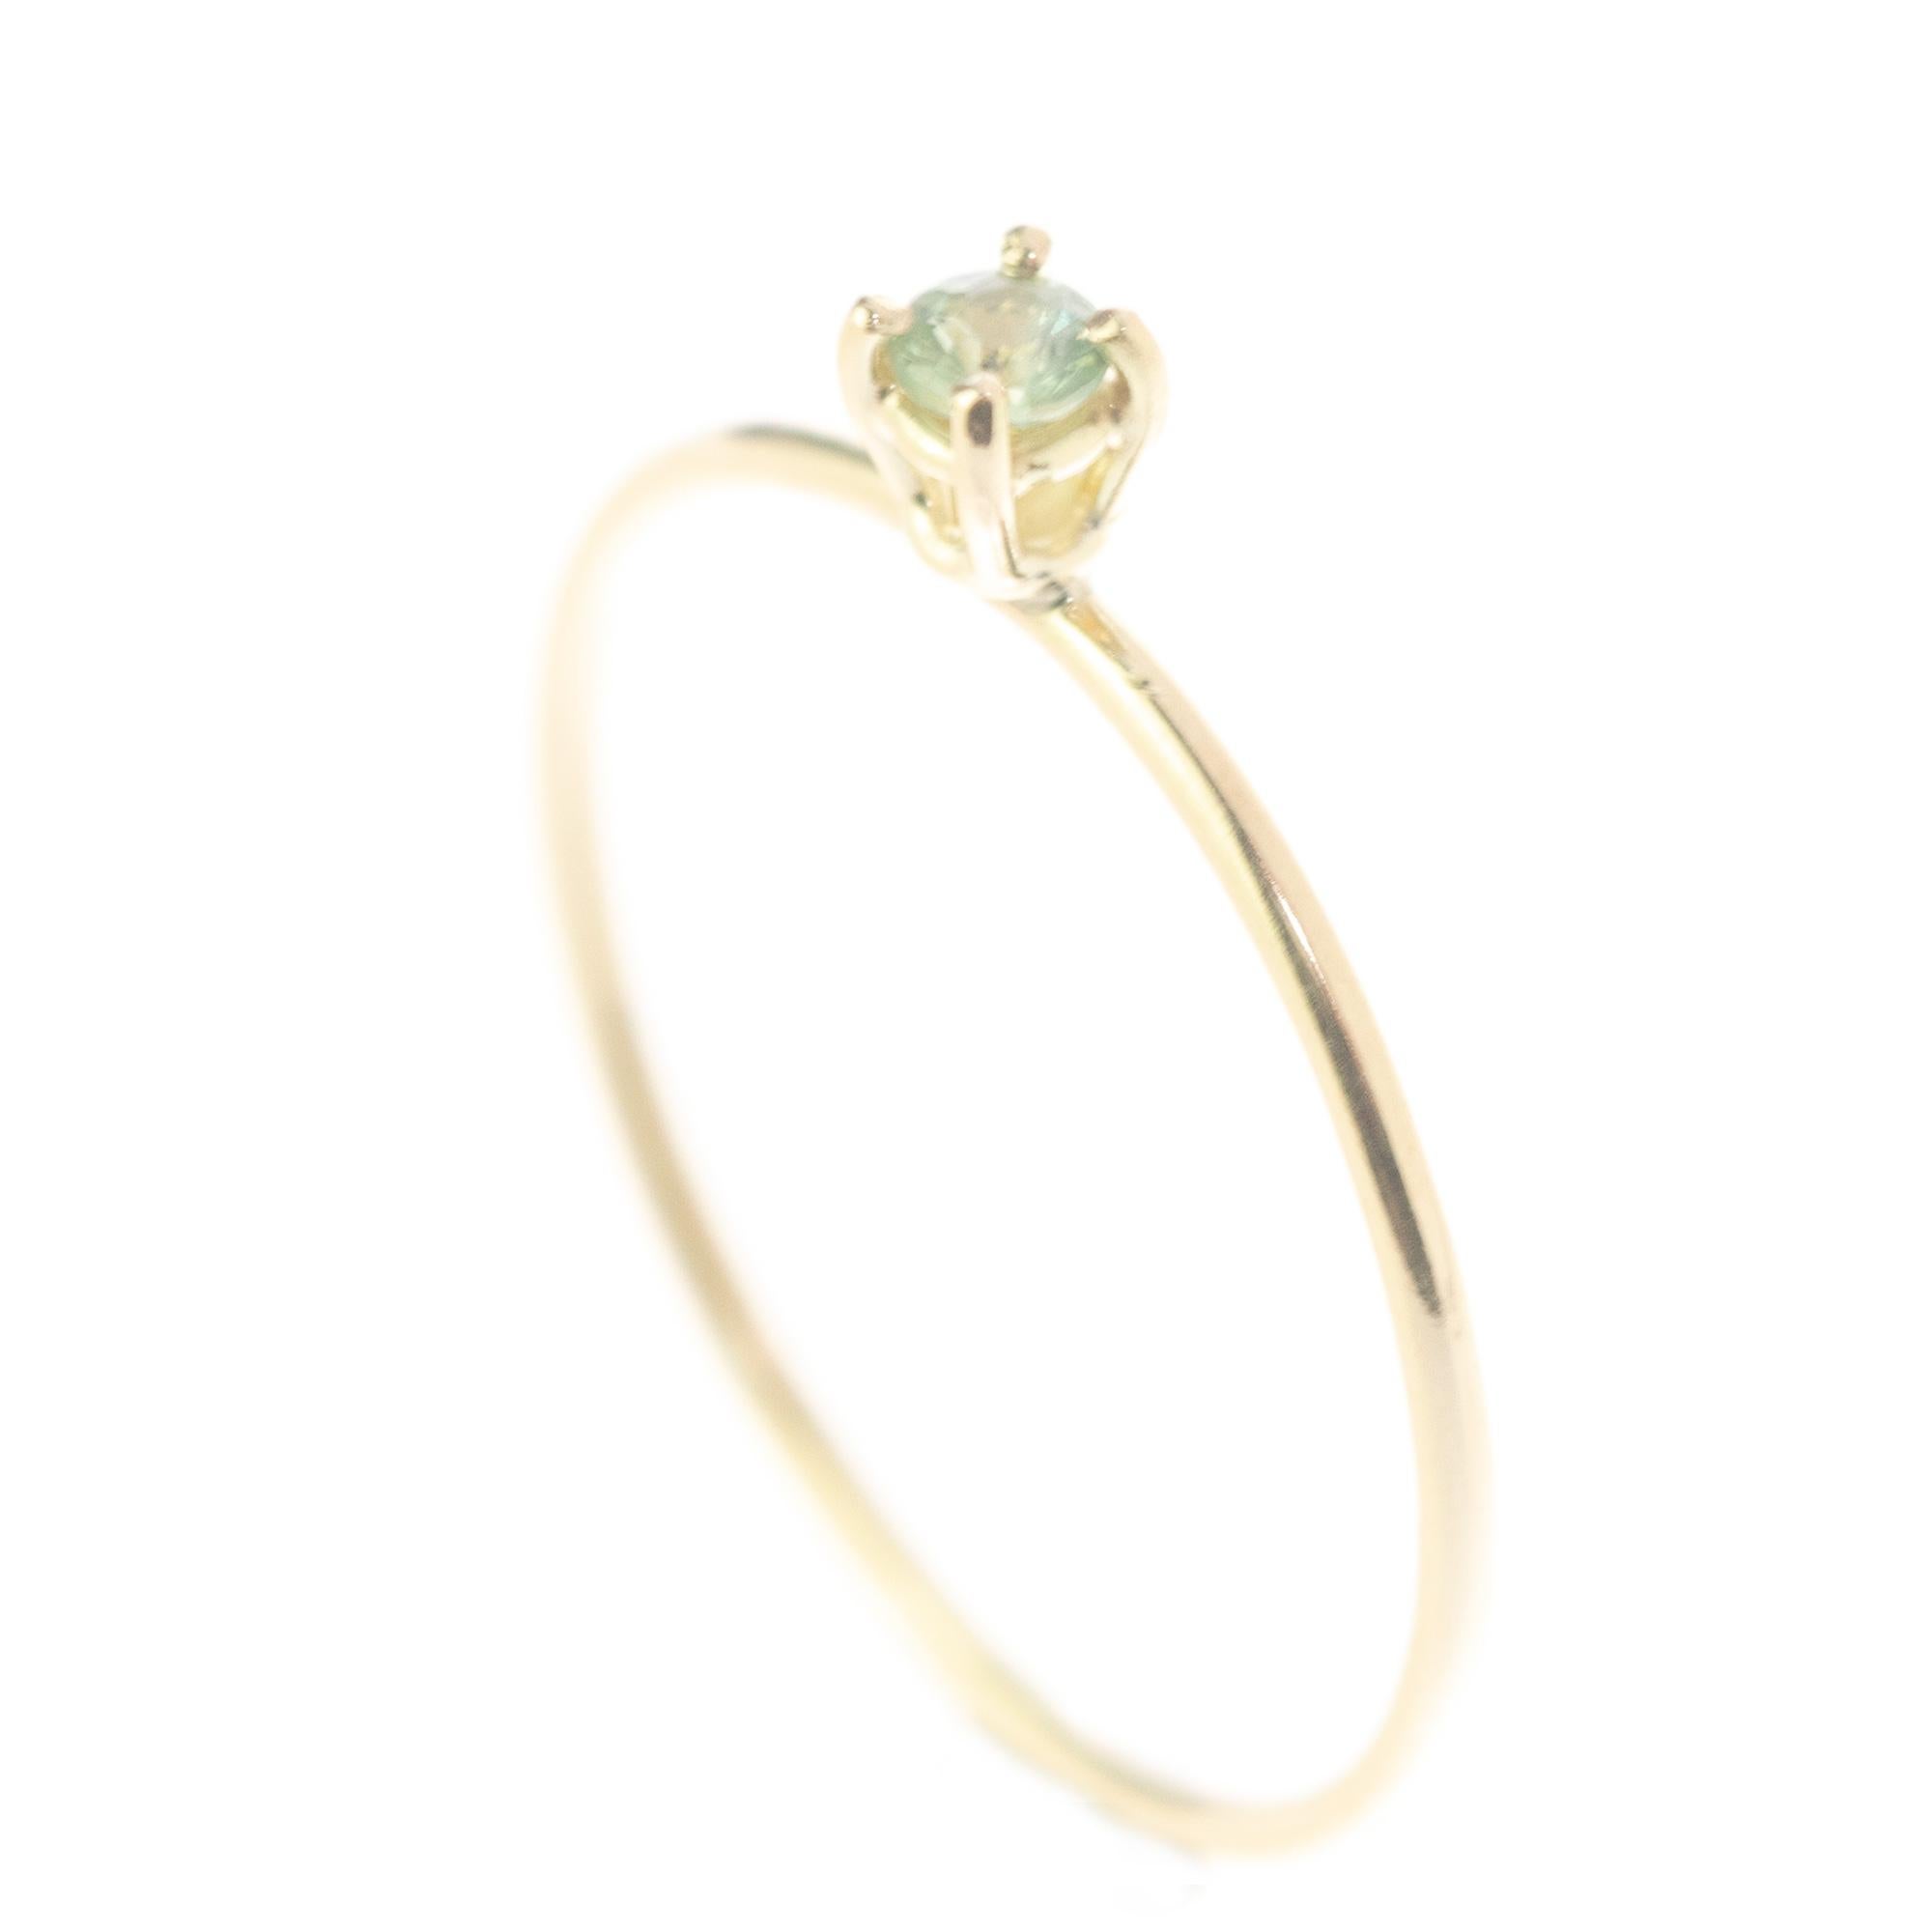 Signature INTINI Jewels sapphire jewellery. Modern and elegant ring design in 18k yellow gold with an brilliant cut with tiny griffes sormounting the ring.

Sapphire is a gemstone associated with royalty. It is believed to attract abundance,